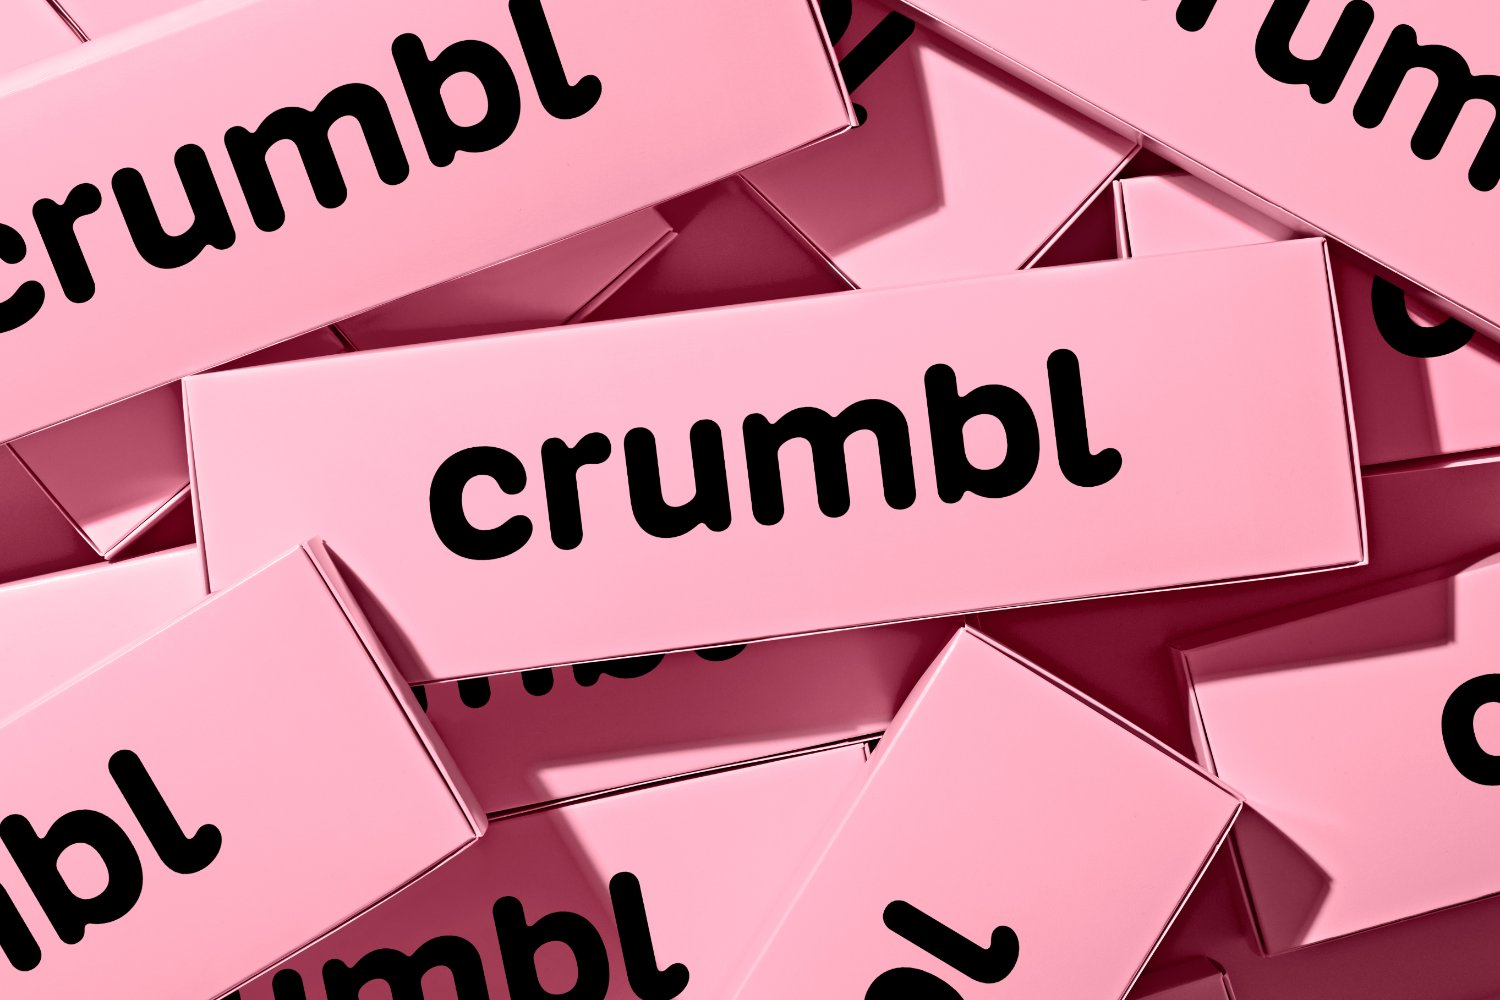 Turner Duckworth’s Crumbl Redesign Is Piping Hot and Fresh Out the Oven